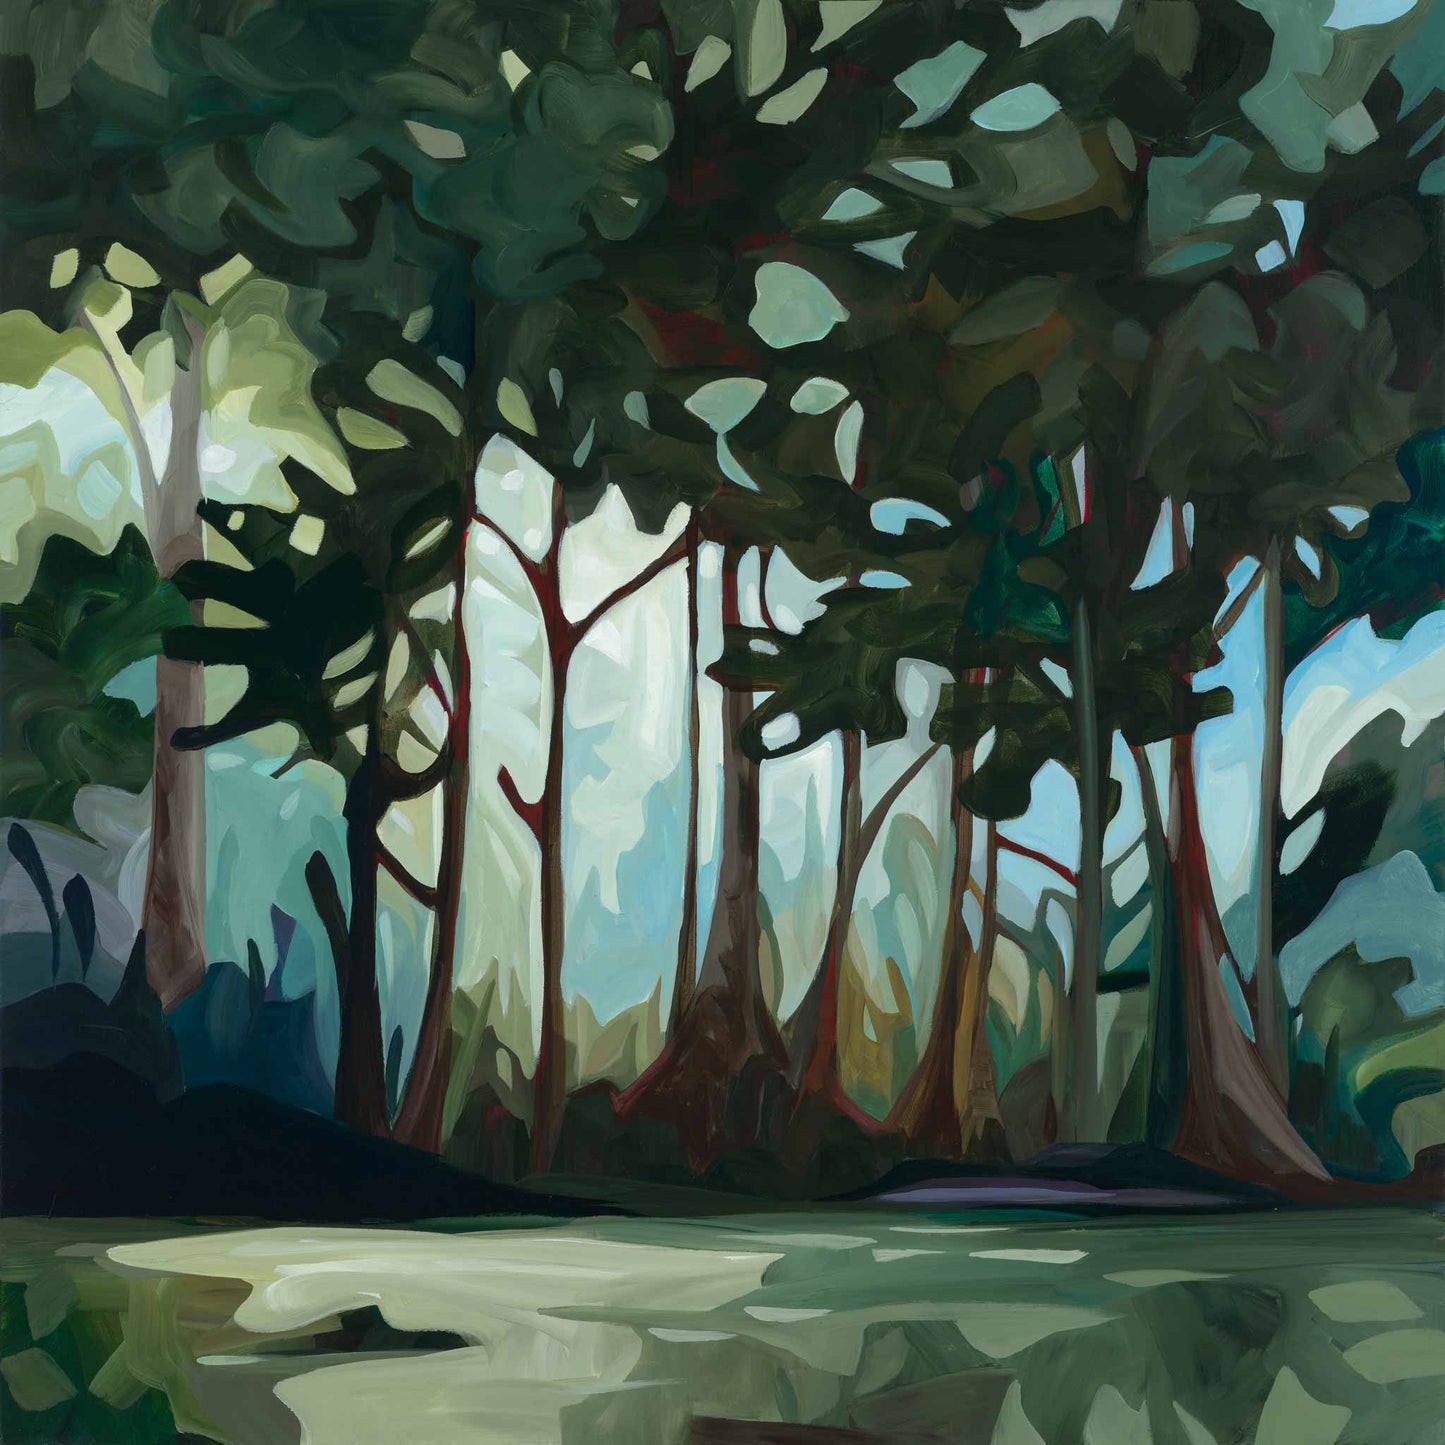 Bring the beauty and tranquility of nature into your home with Tanglewood, an acrylic landscape painting of a forest par